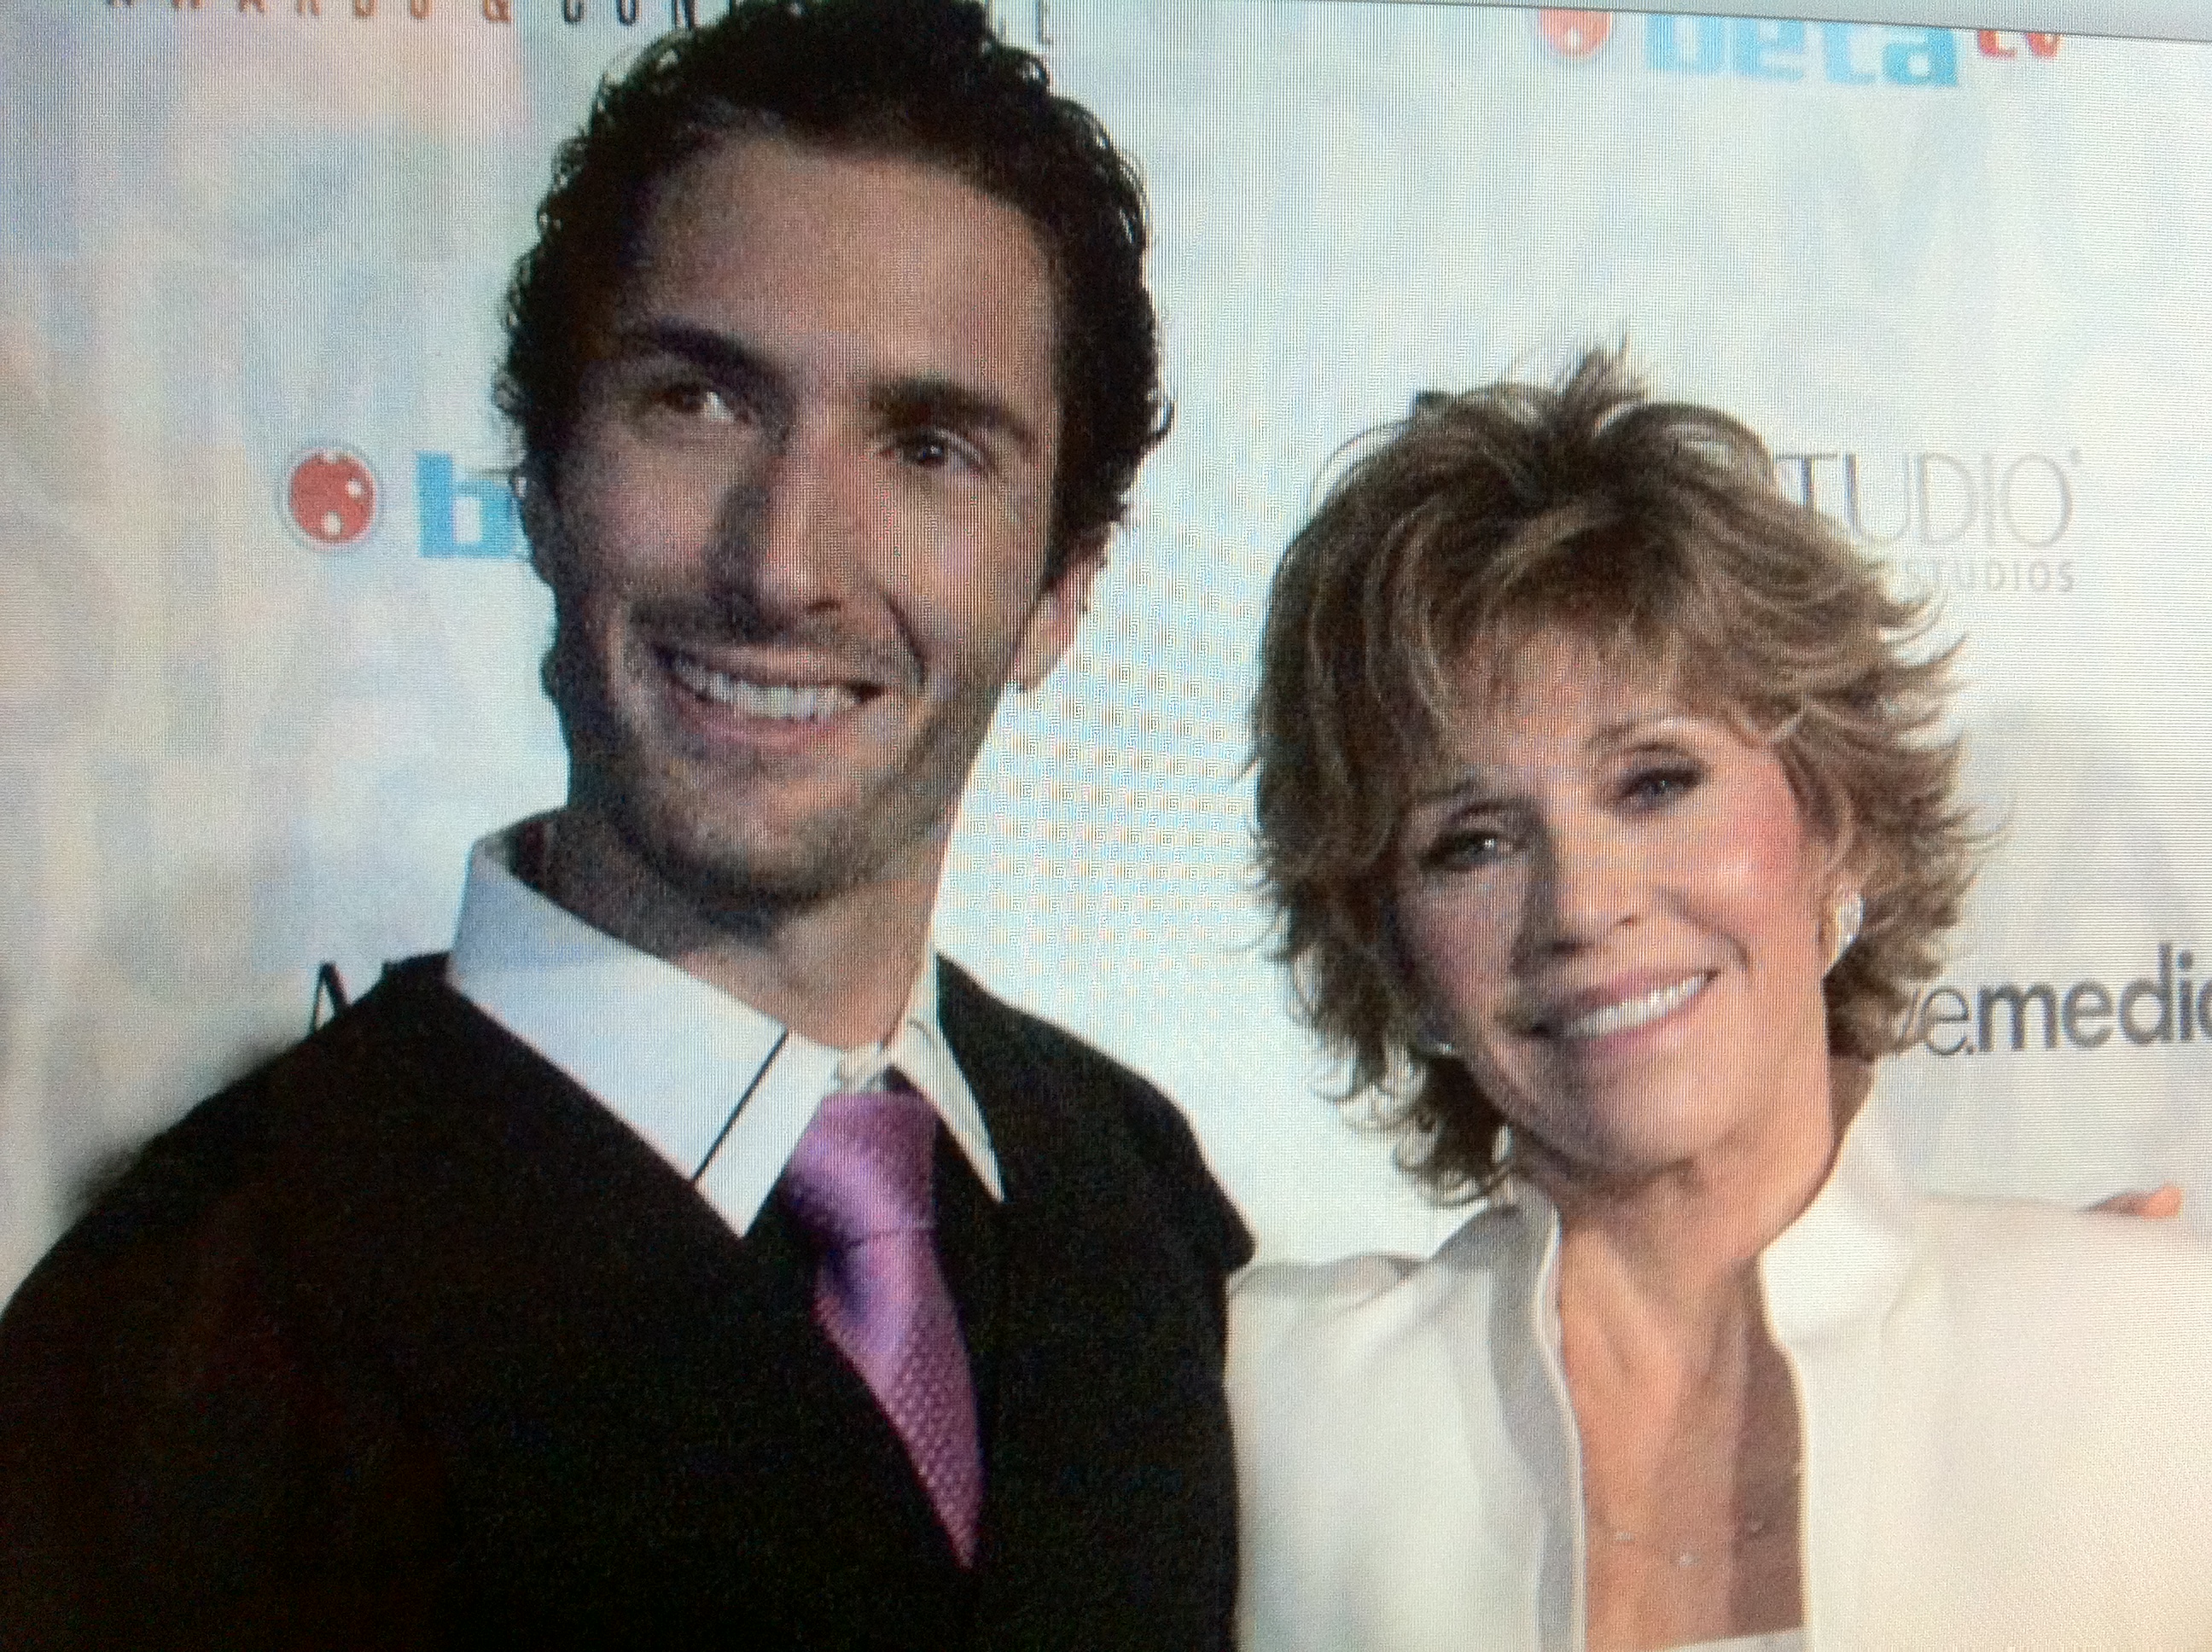 Photo from Jett Dunlap's interview with Jane Fonda. At The Hollywood Music In Media Awards